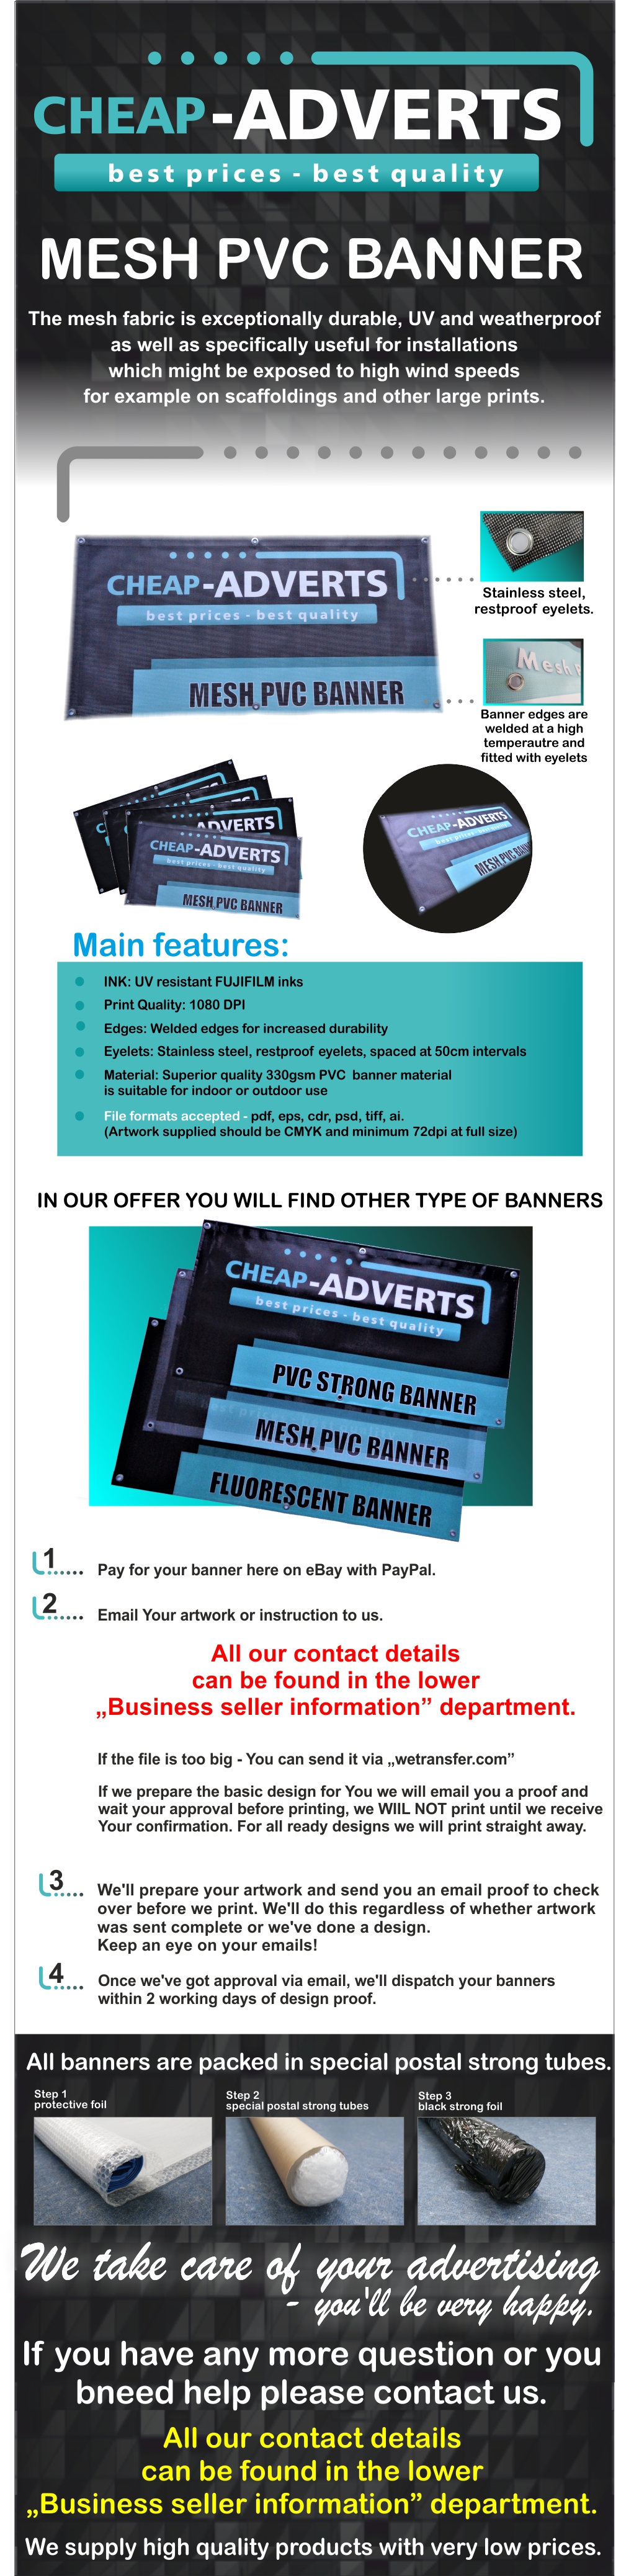 3ft x 16ft PRINTED OUTDOOR ADVERTISING SIGN DISPLAY PVC MESH BANNERS